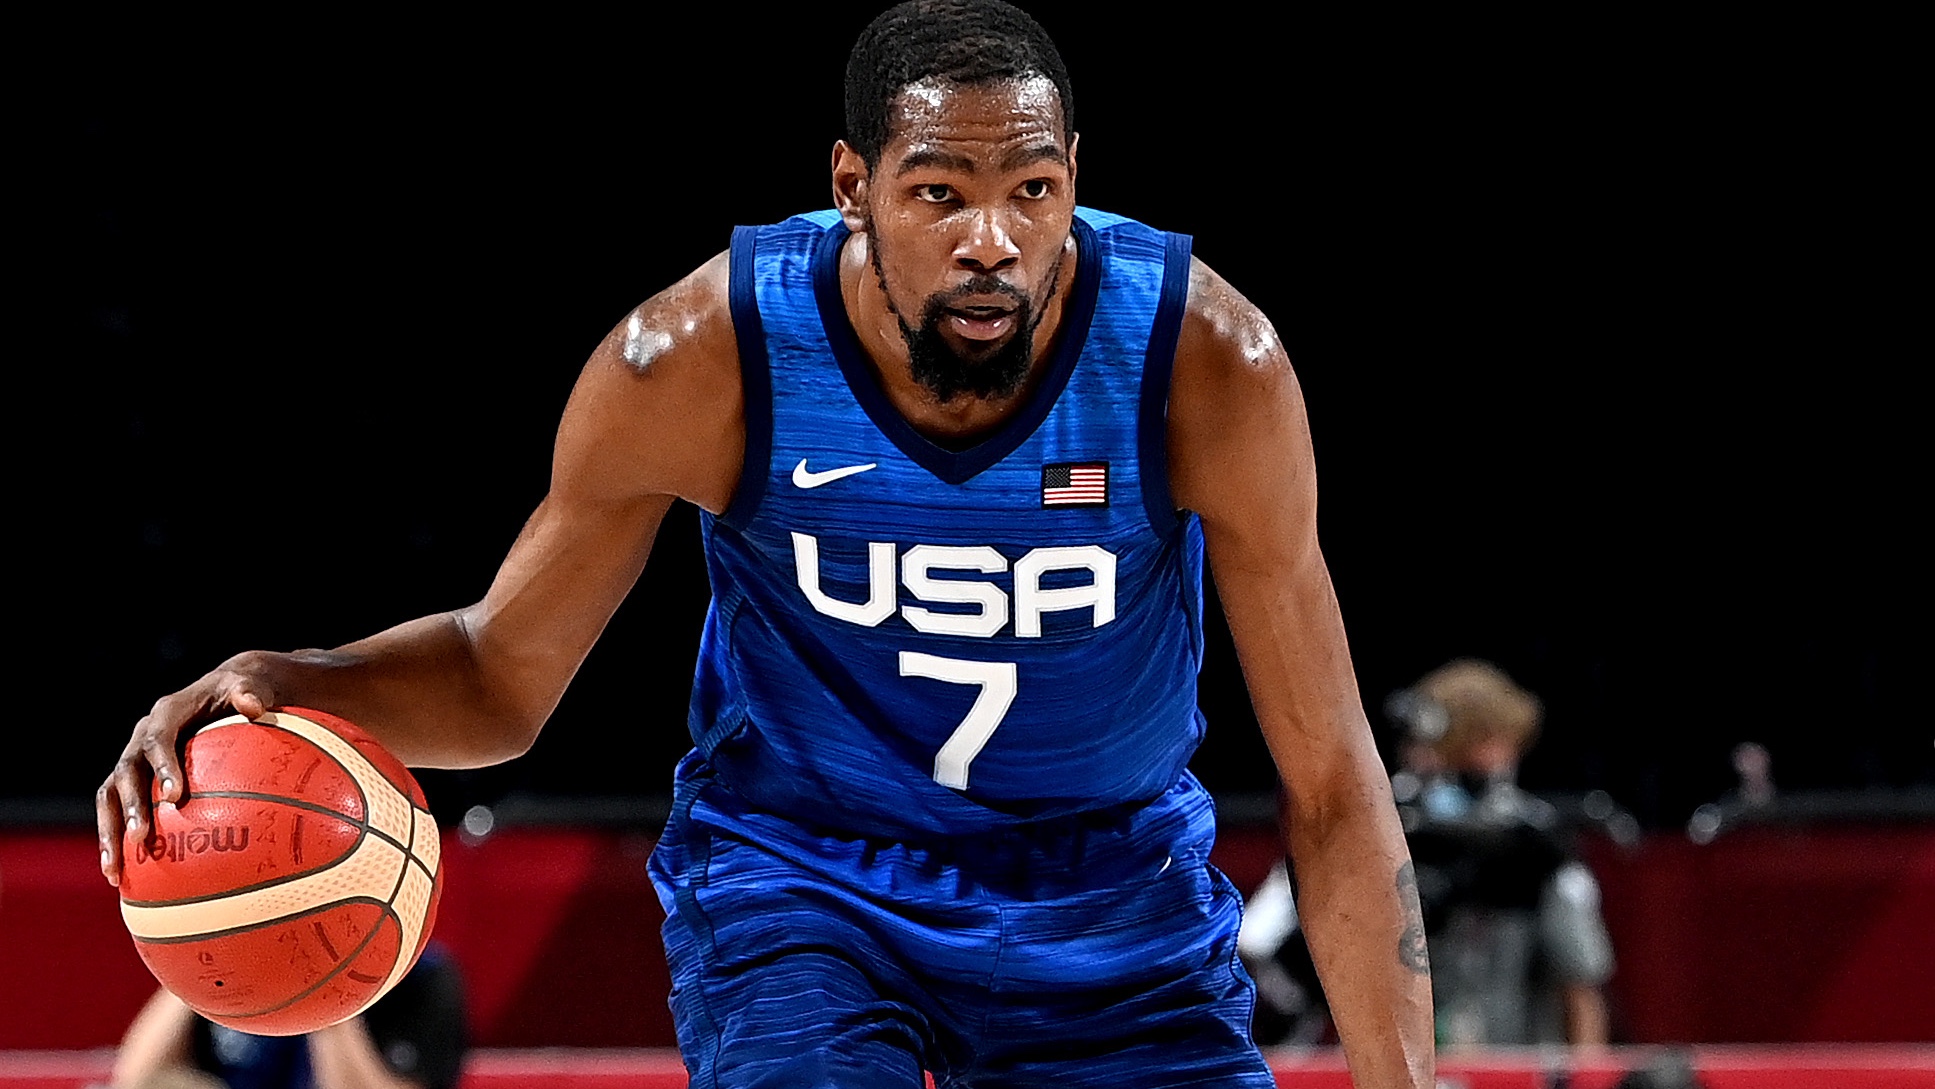 Team Usa Vs Australia Men S Basketball Live Stream Olympics Channels Start Time And How To Watch Online Tom S Guide